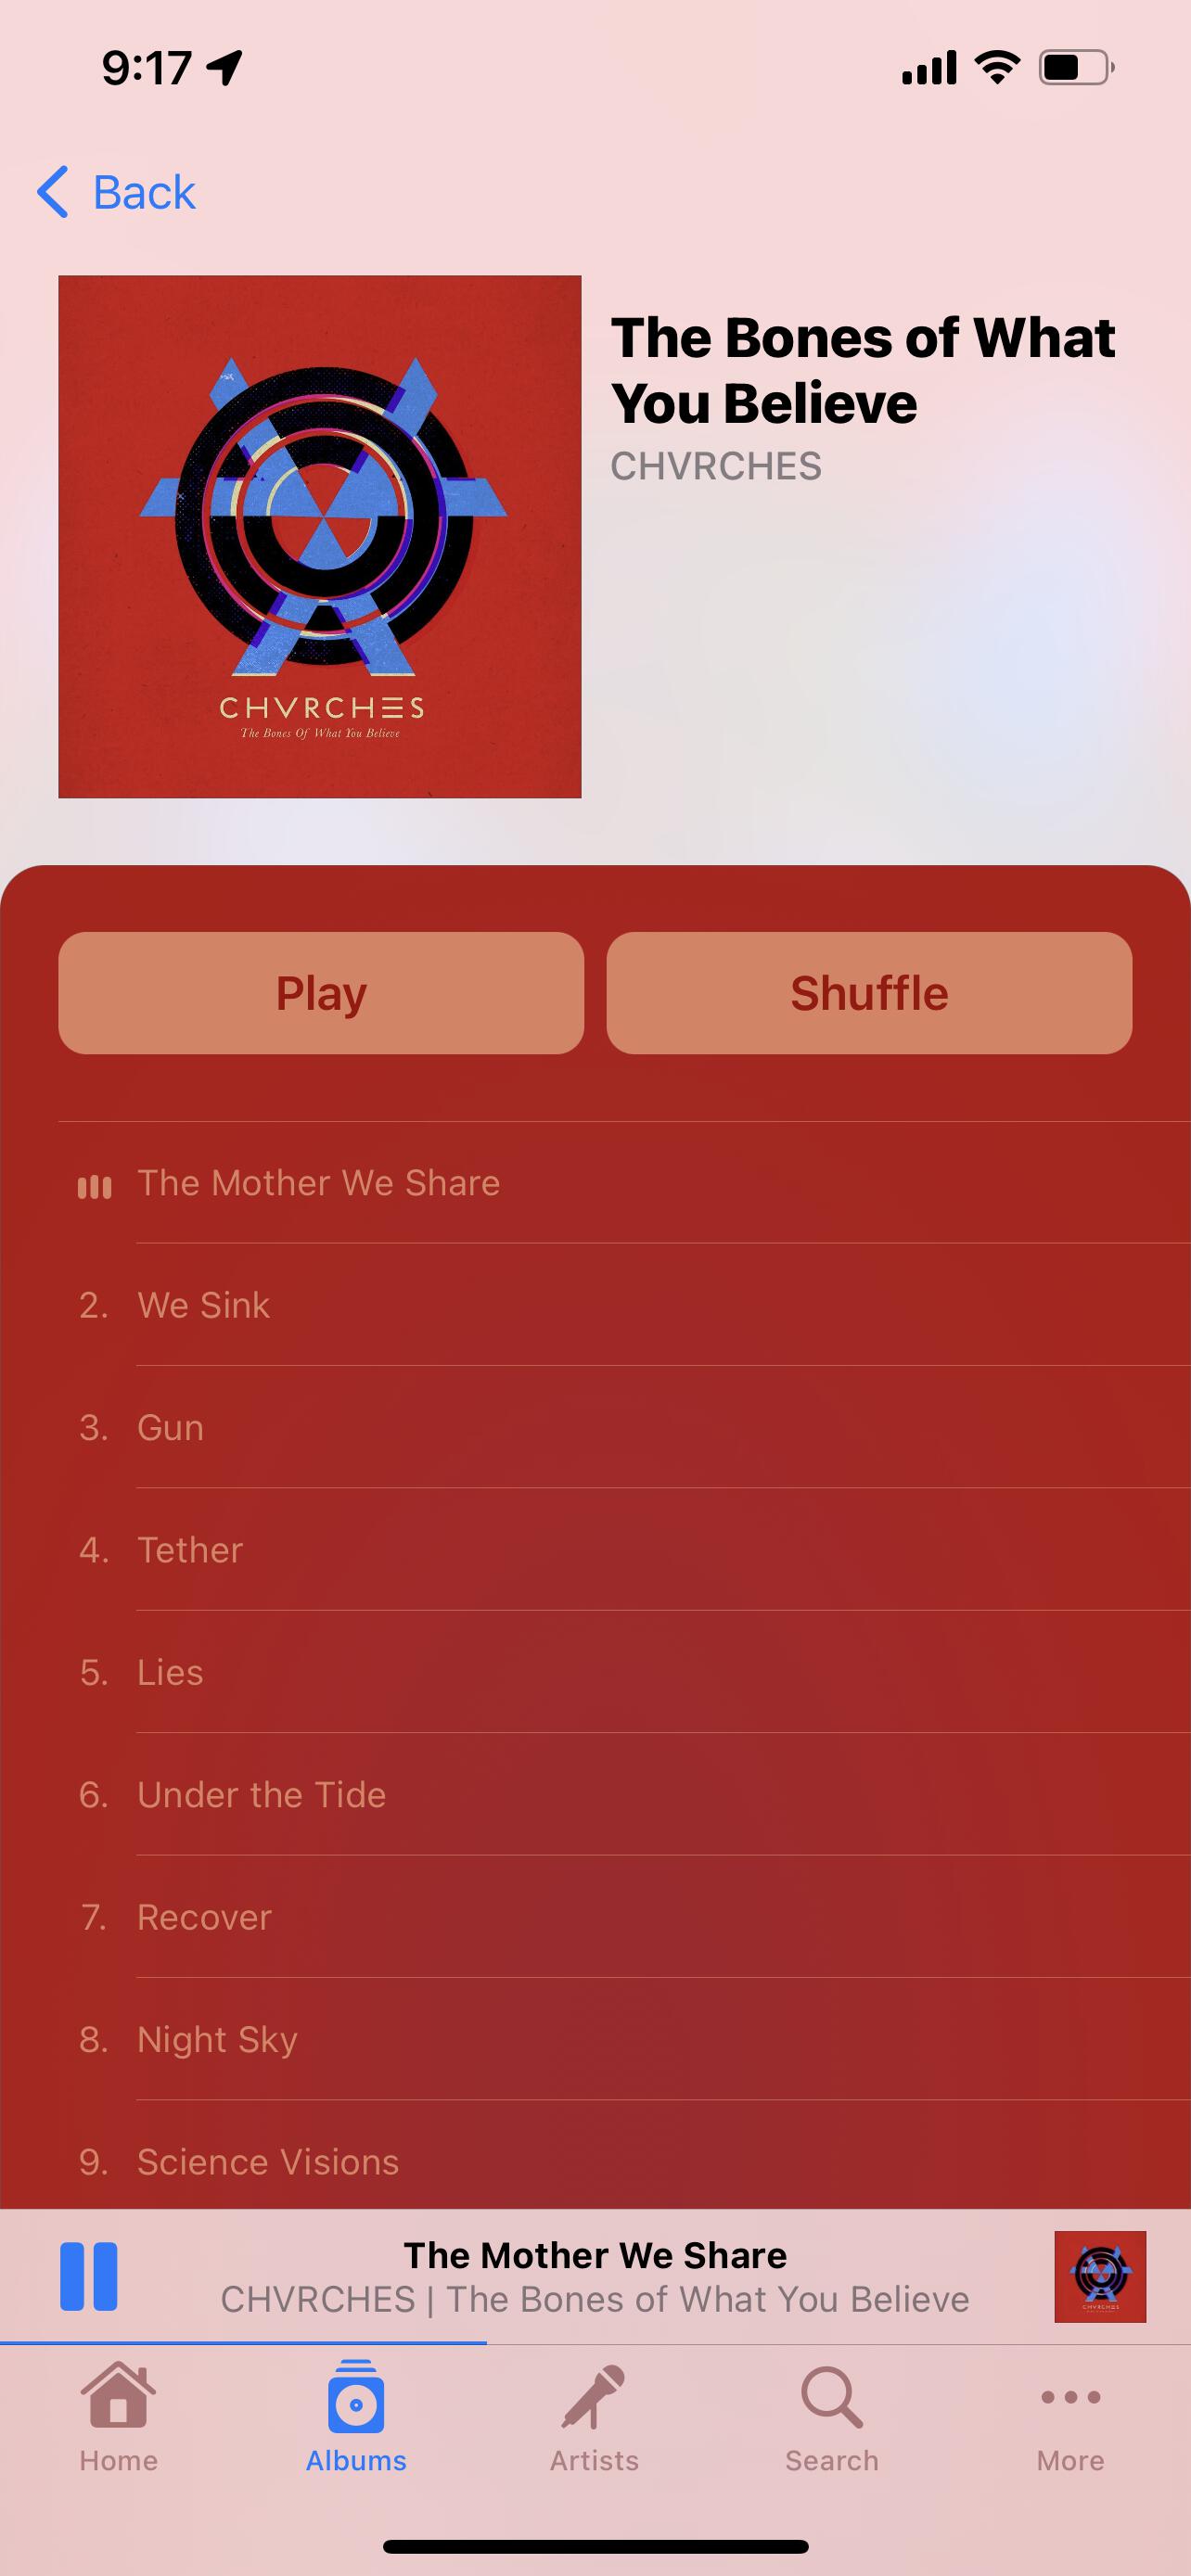 Image of the album view in light mode with a predominantly red record